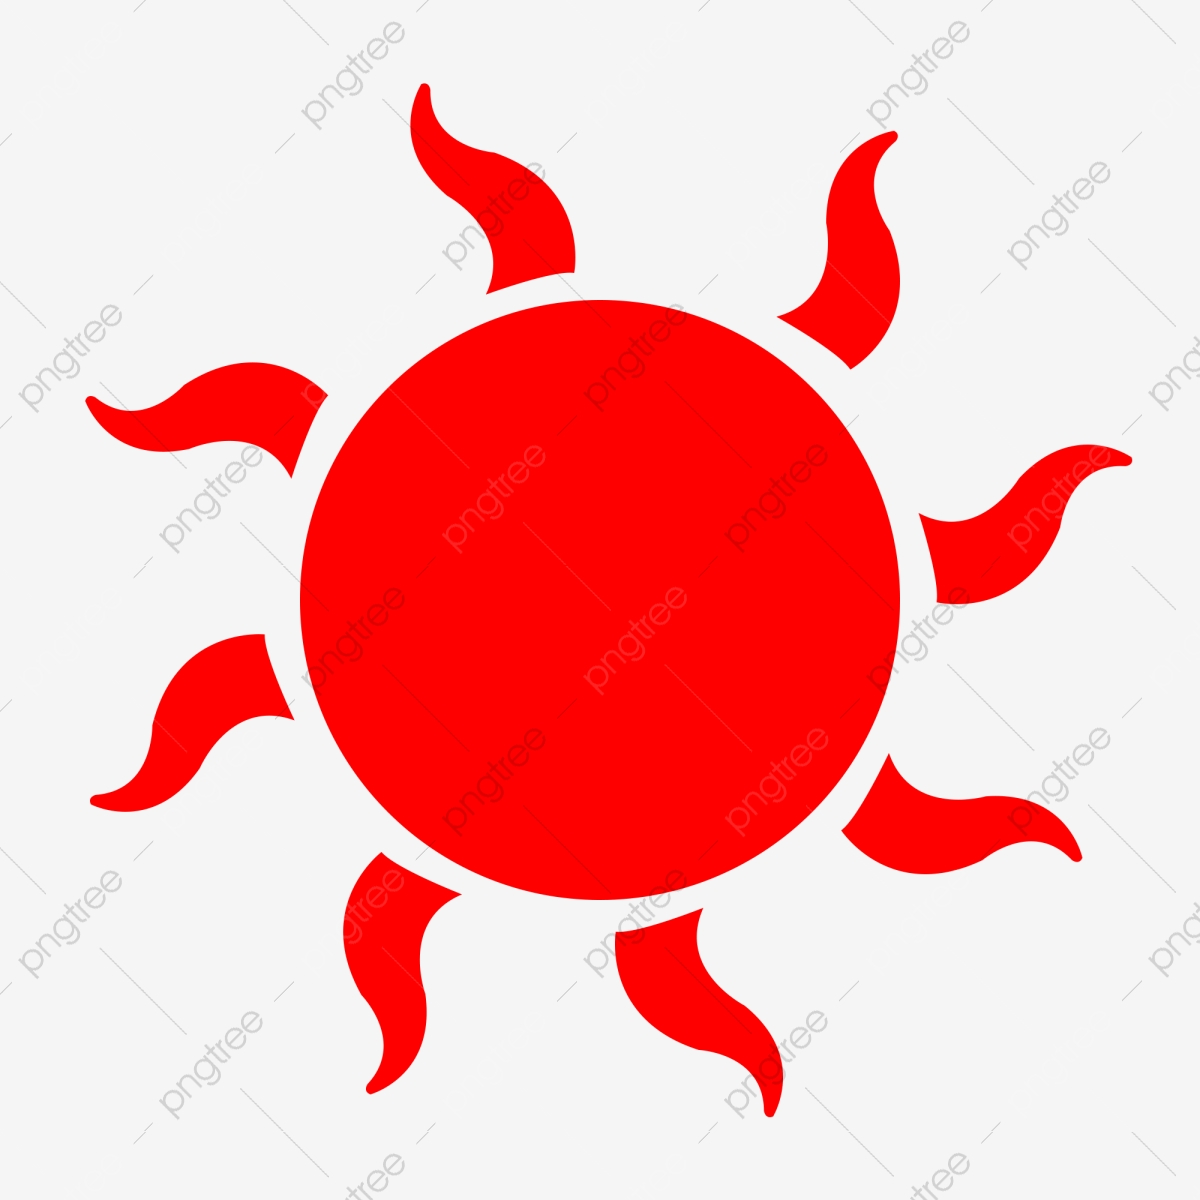 sunny clipart red